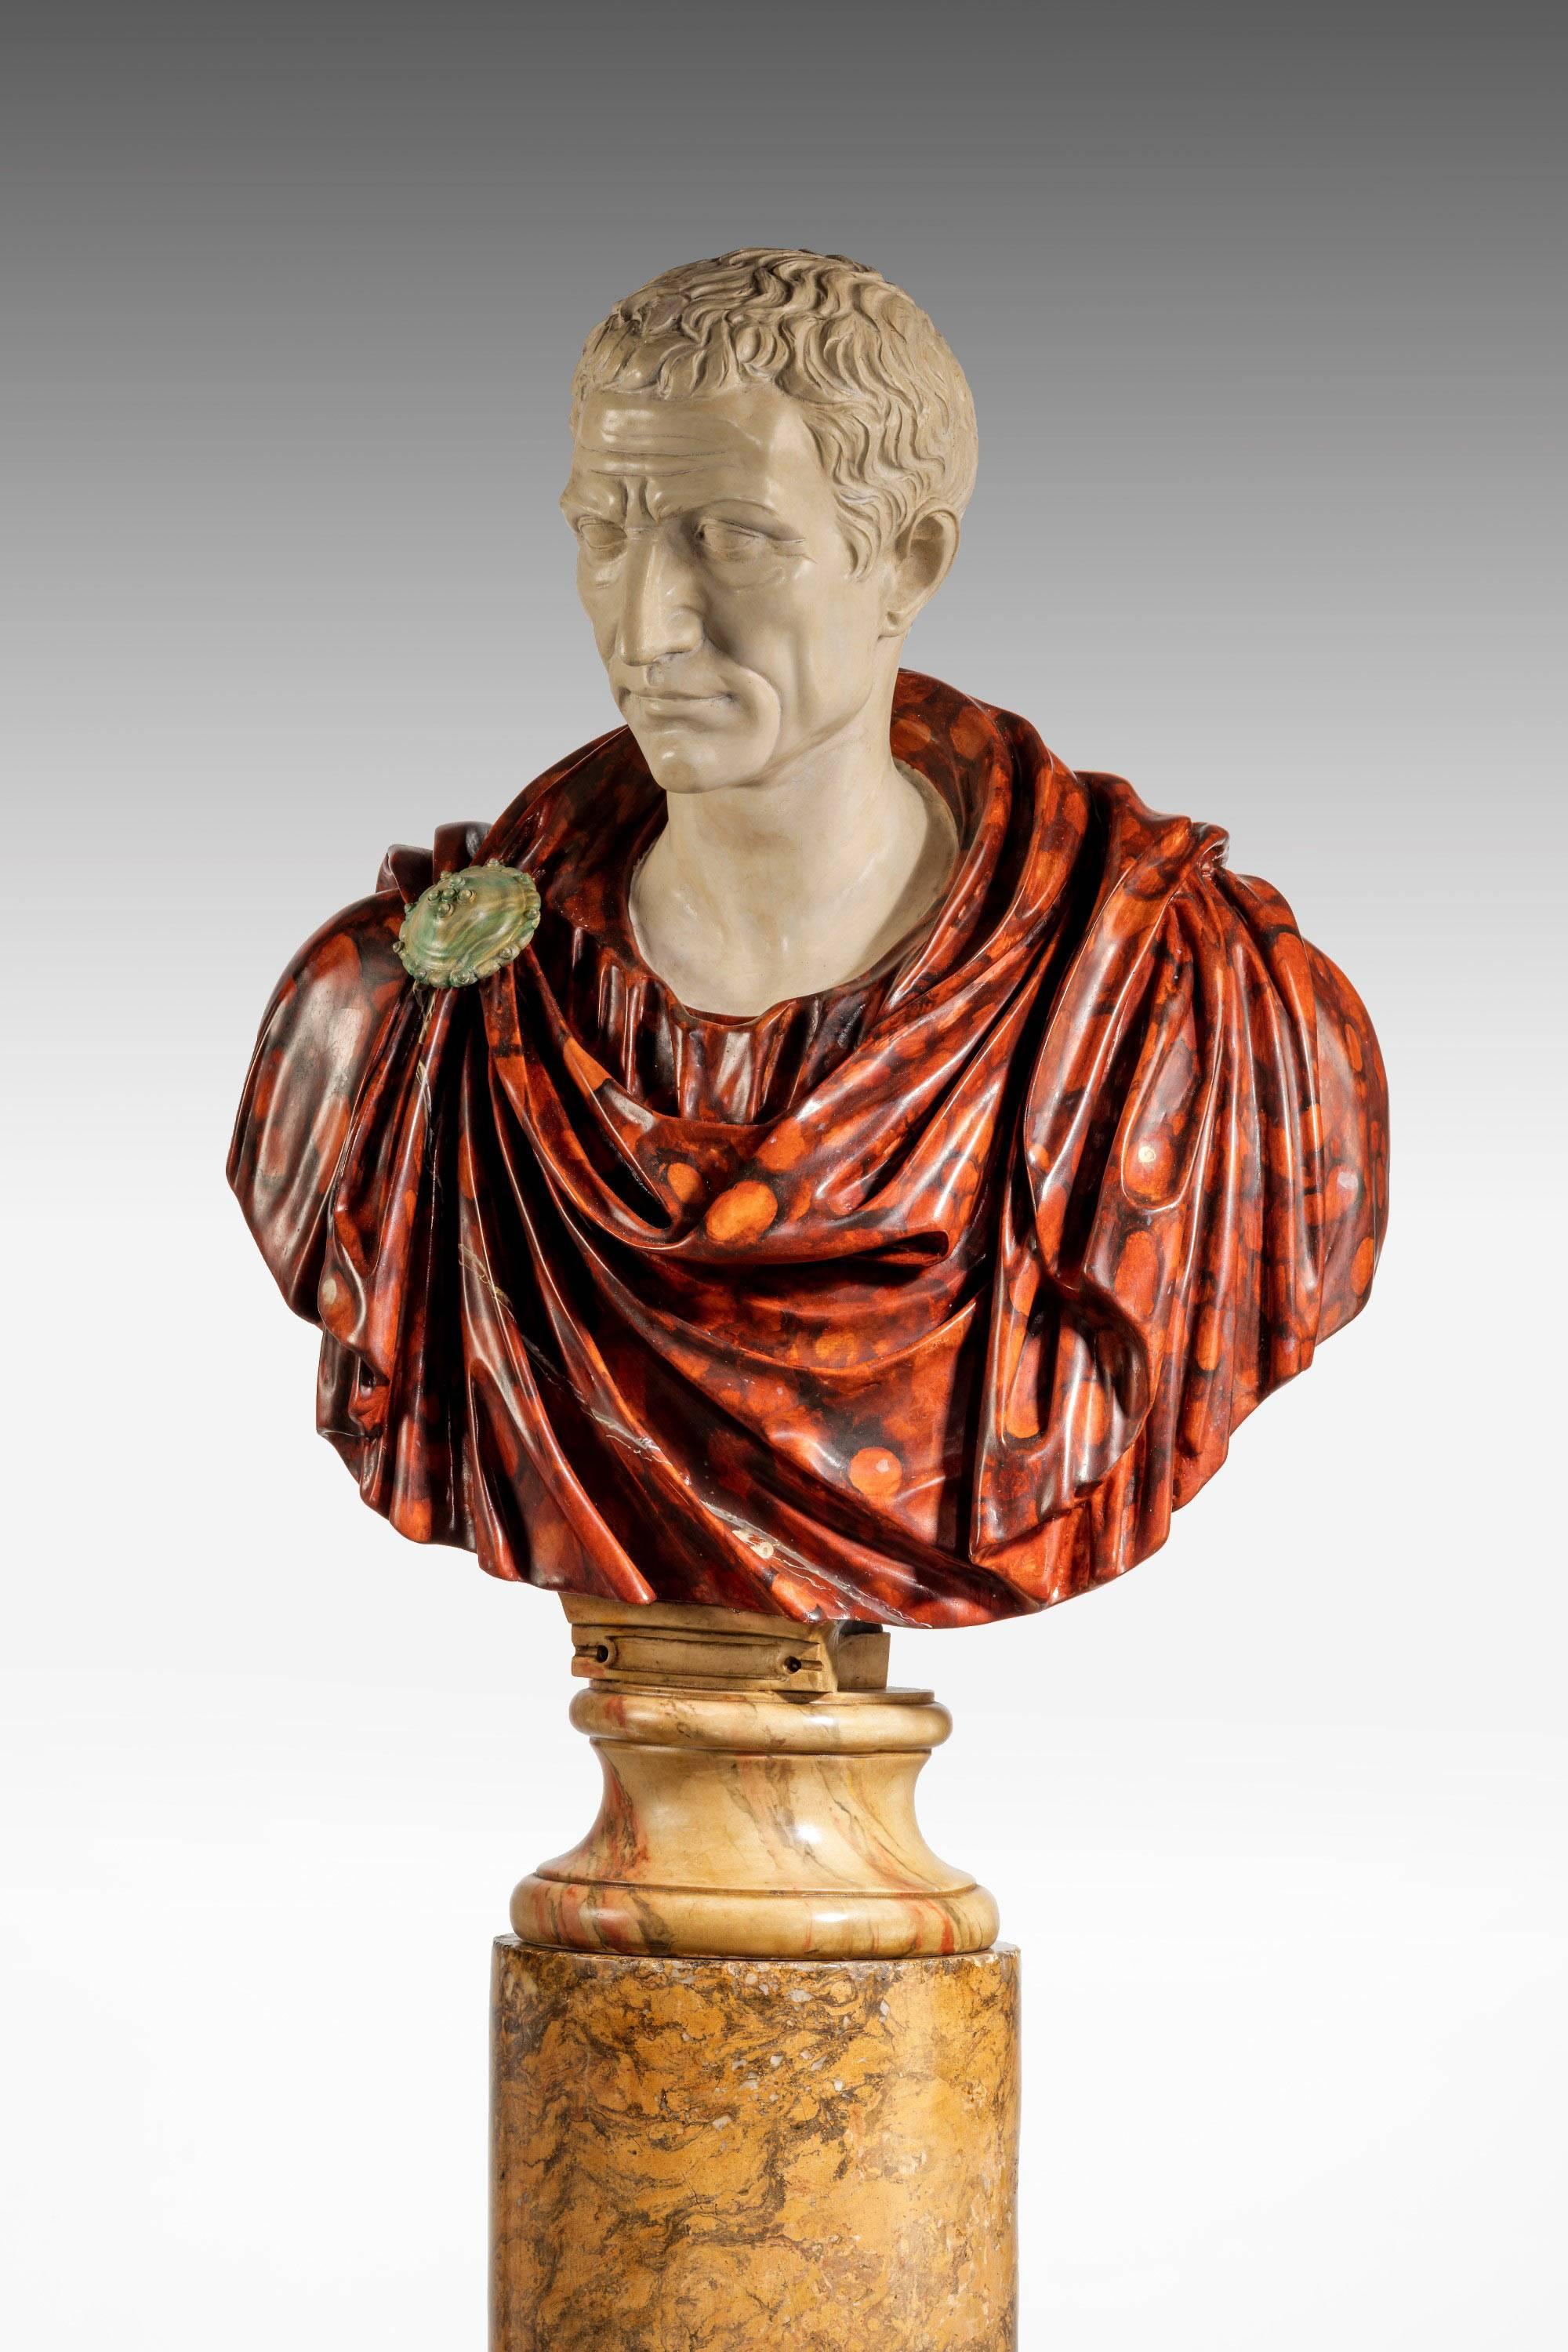 A copy of a Roman politician Marcus Junius Brutus (85 BC-42 BC).

Sold without Pedestal.

Marcus Junius Brutus June 85 BC–23 October 42 BC, often referred to as Brutus, was a politician of the late Roman Republic. After being adopted by his